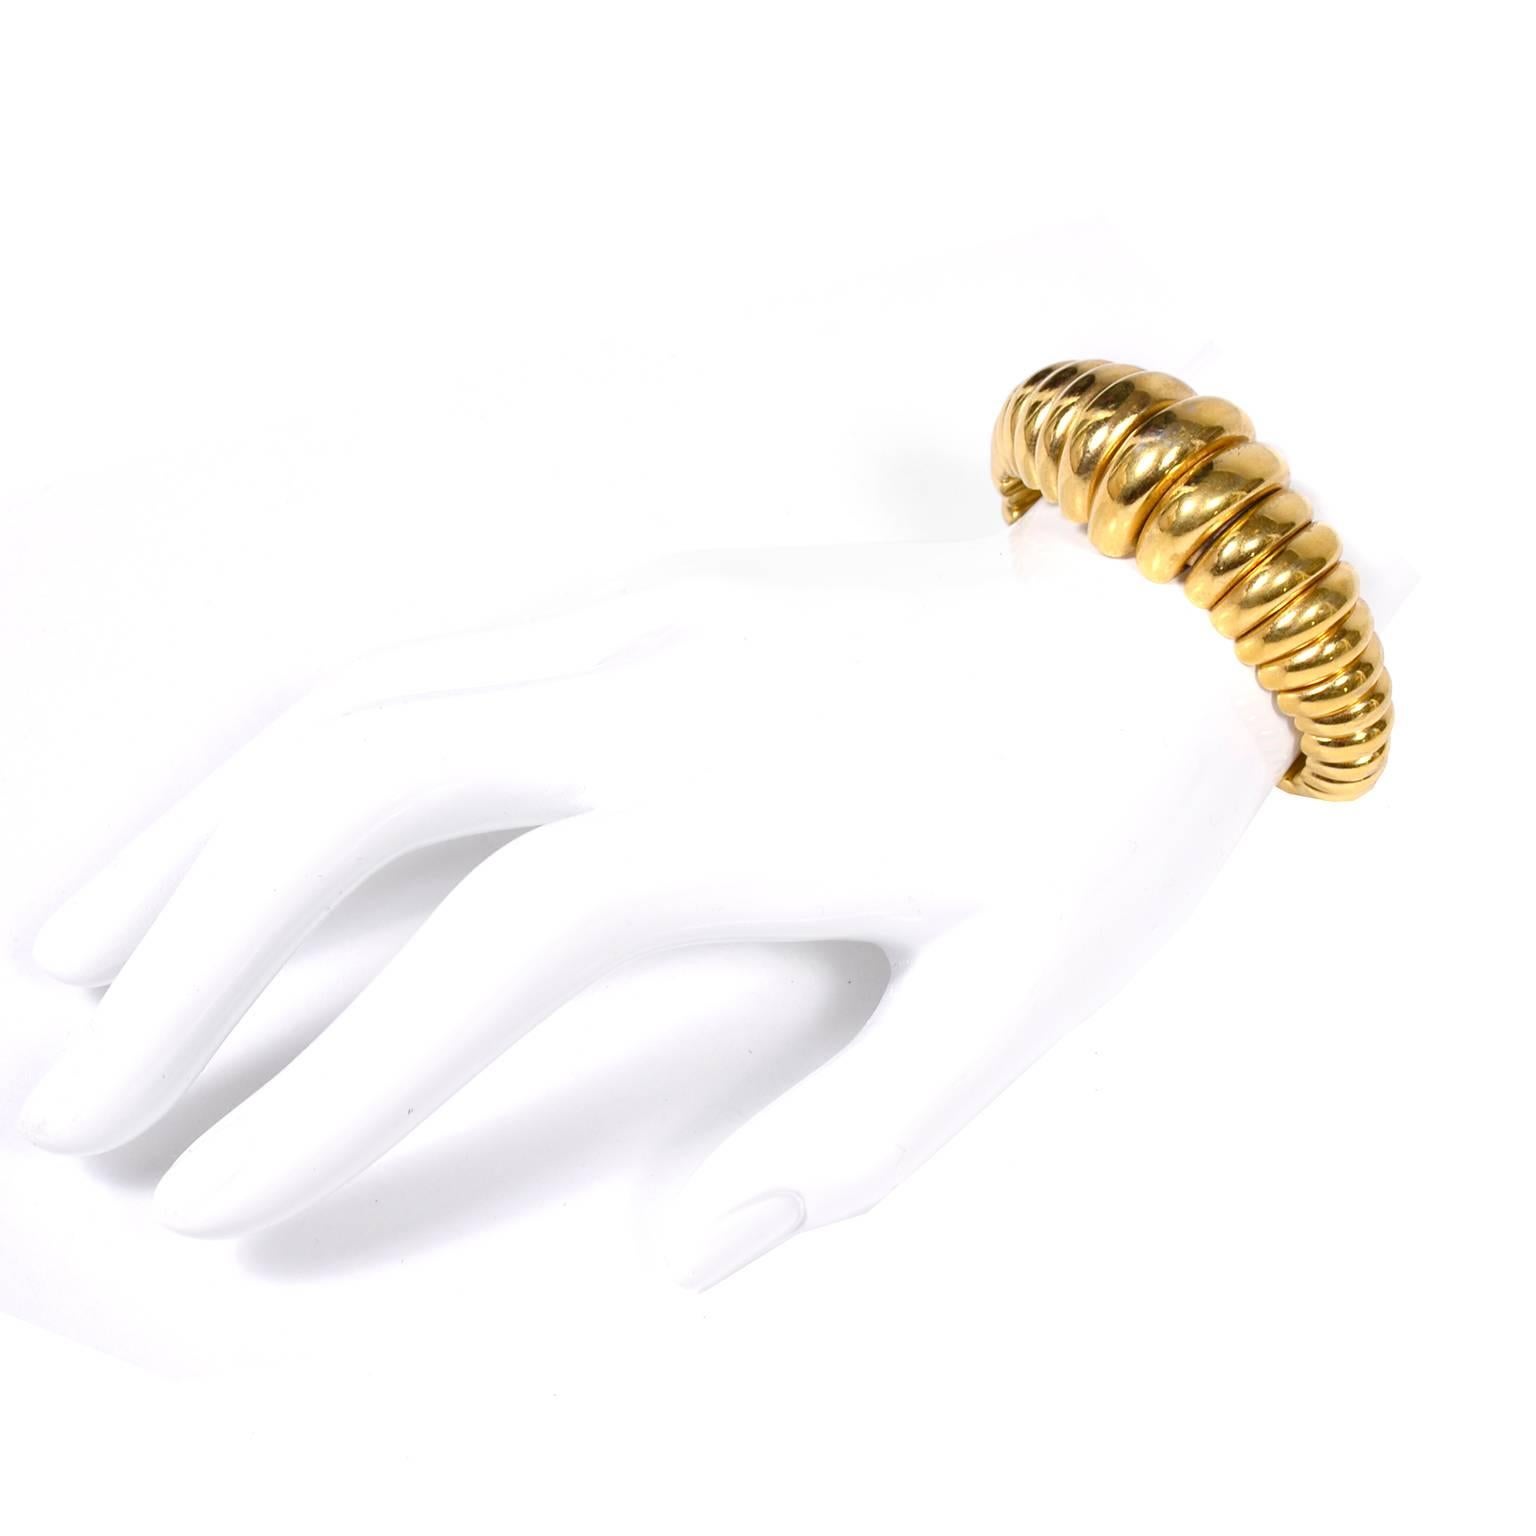 We love this YSL vintage gilded gold metal cuff bracelet. YSL jewelry has become very collectible and it's getting harder to find! This gold tone ridged Yves Saint Laurent bracelet is marked YSL -  Made in France - E8. The cuff measures 1